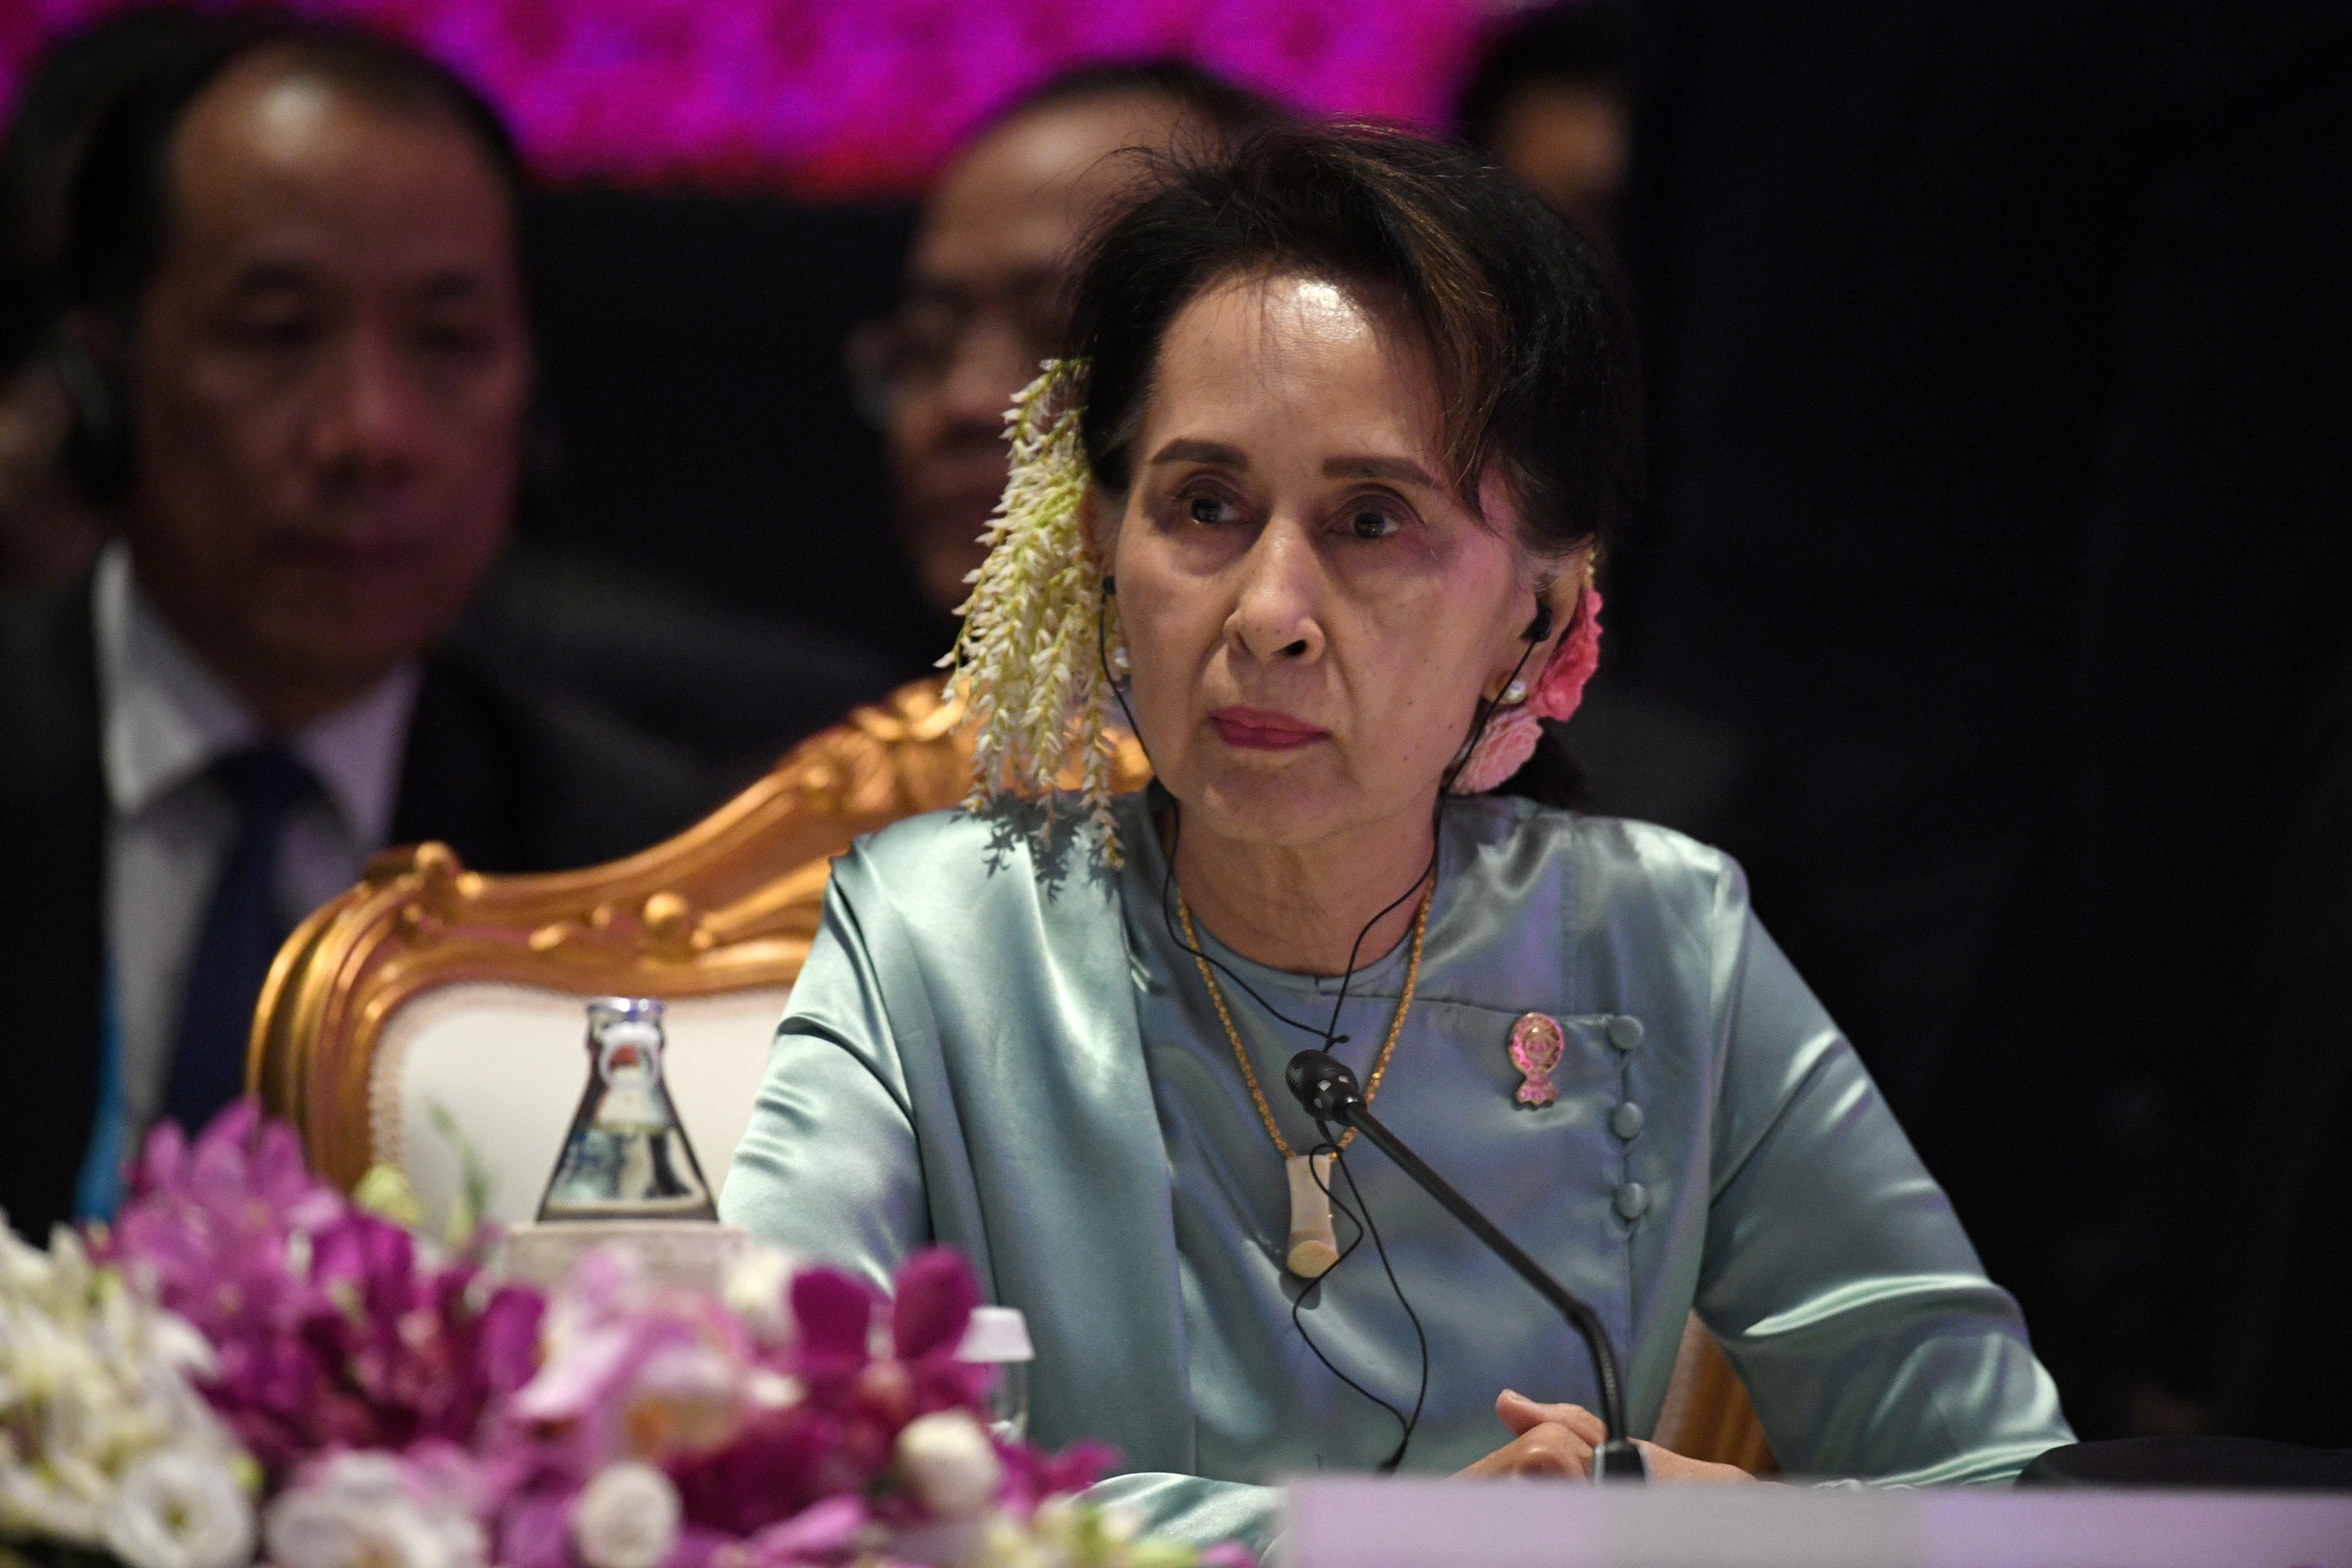 State Counsellor of Myanmar Aung San Suu Kyi attends the 22nd ASEAN Plus Three Summit in Bangkok, Thailand, November 4, 2019. REUTERS/Chalinee Thirasupa/File Photo